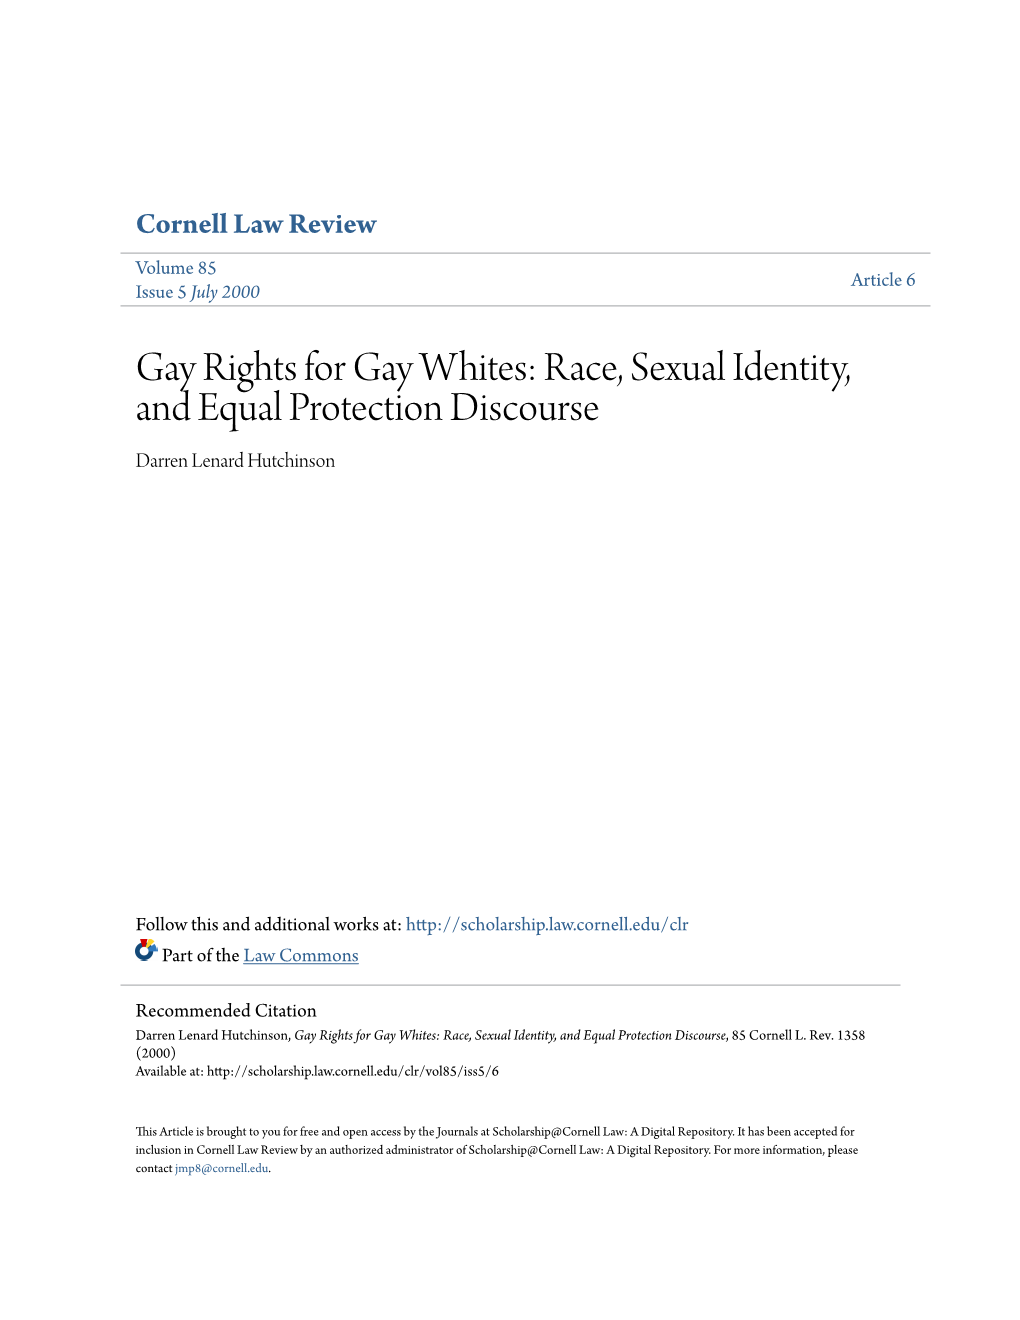 Race, Sexual Identity, and Equal Protection Discourse Darren Lenard Hutchinson